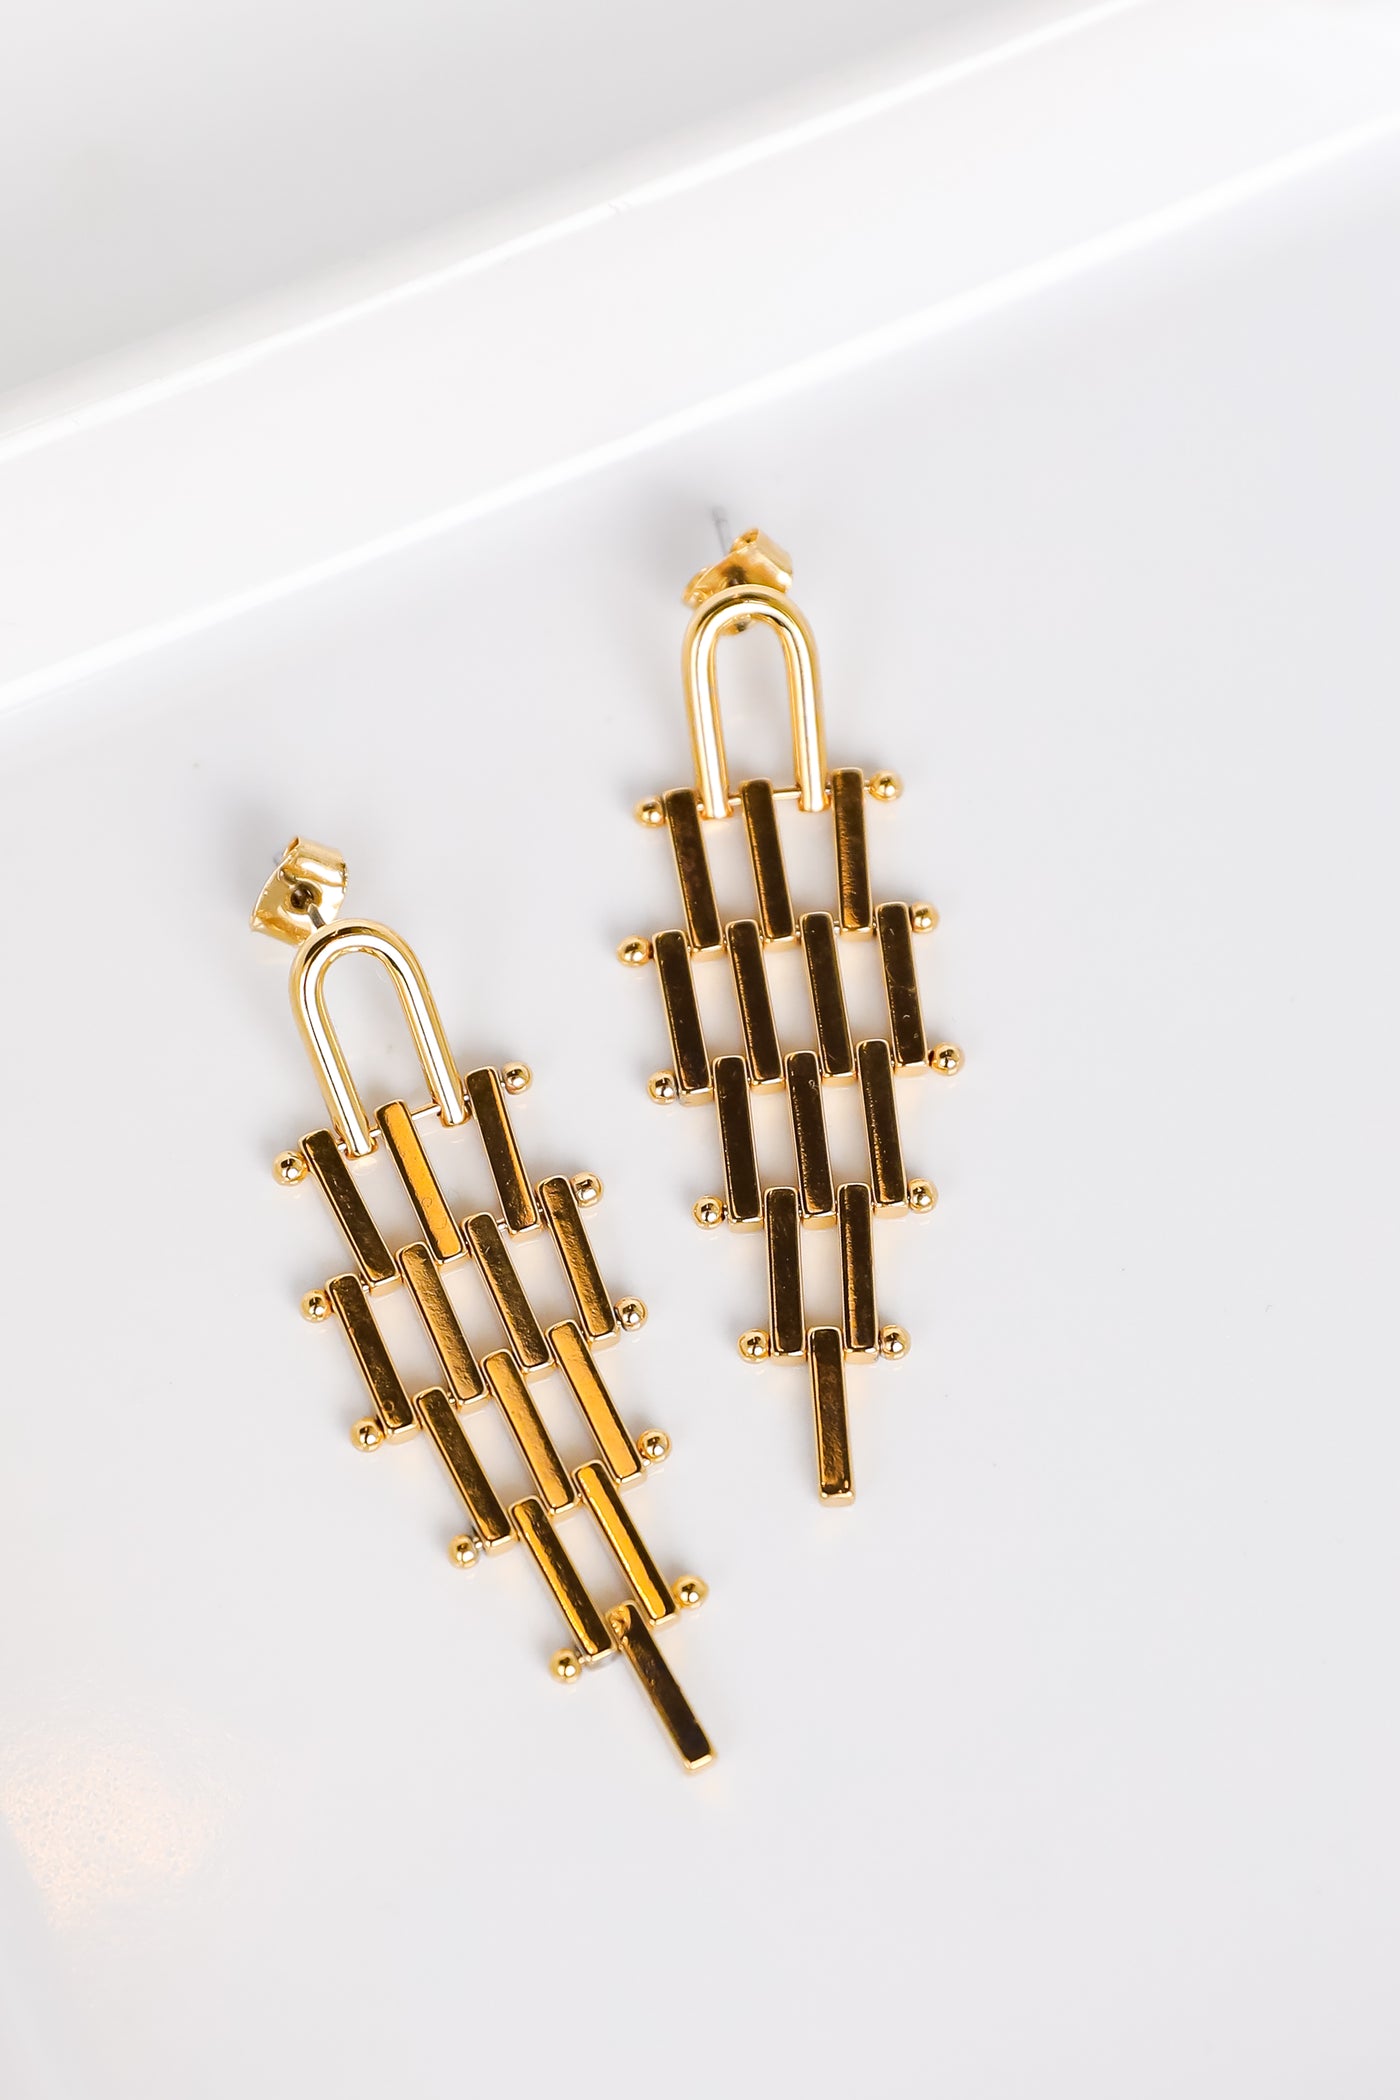 gold tiered earrings flat lay